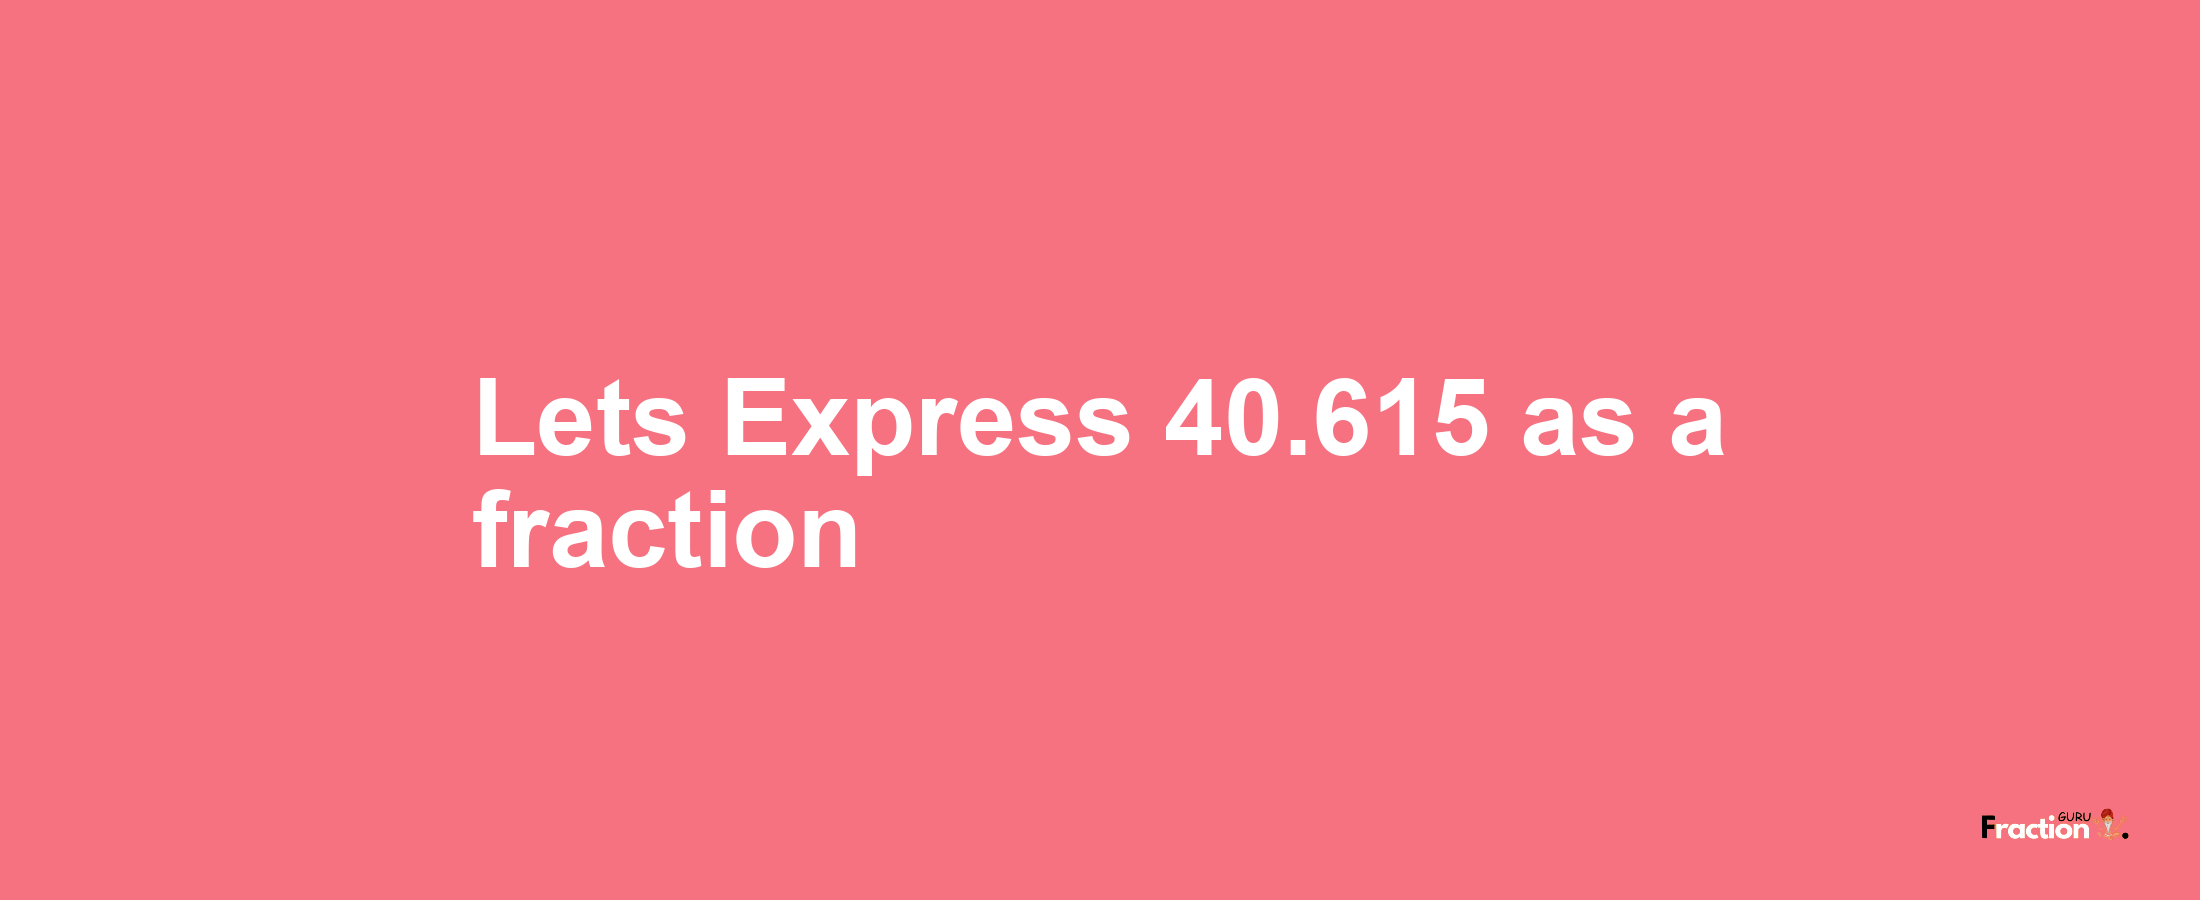 Lets Express 40.615 as afraction